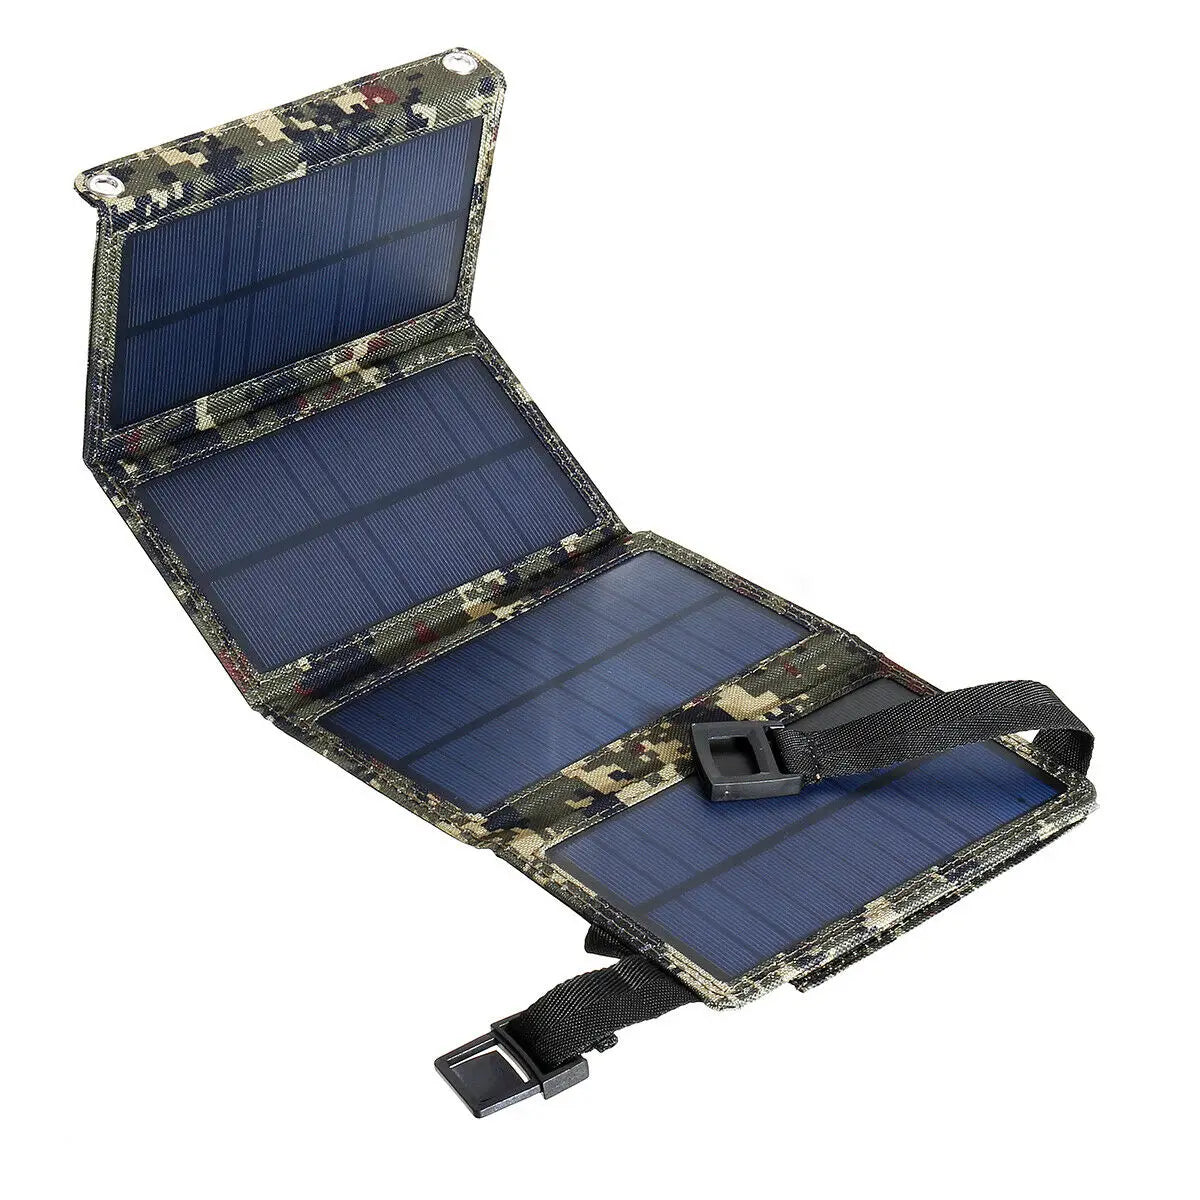 20W Outdoor Foldable Solar Panel, Not designed for withstanding bending forces during transport or assembly.